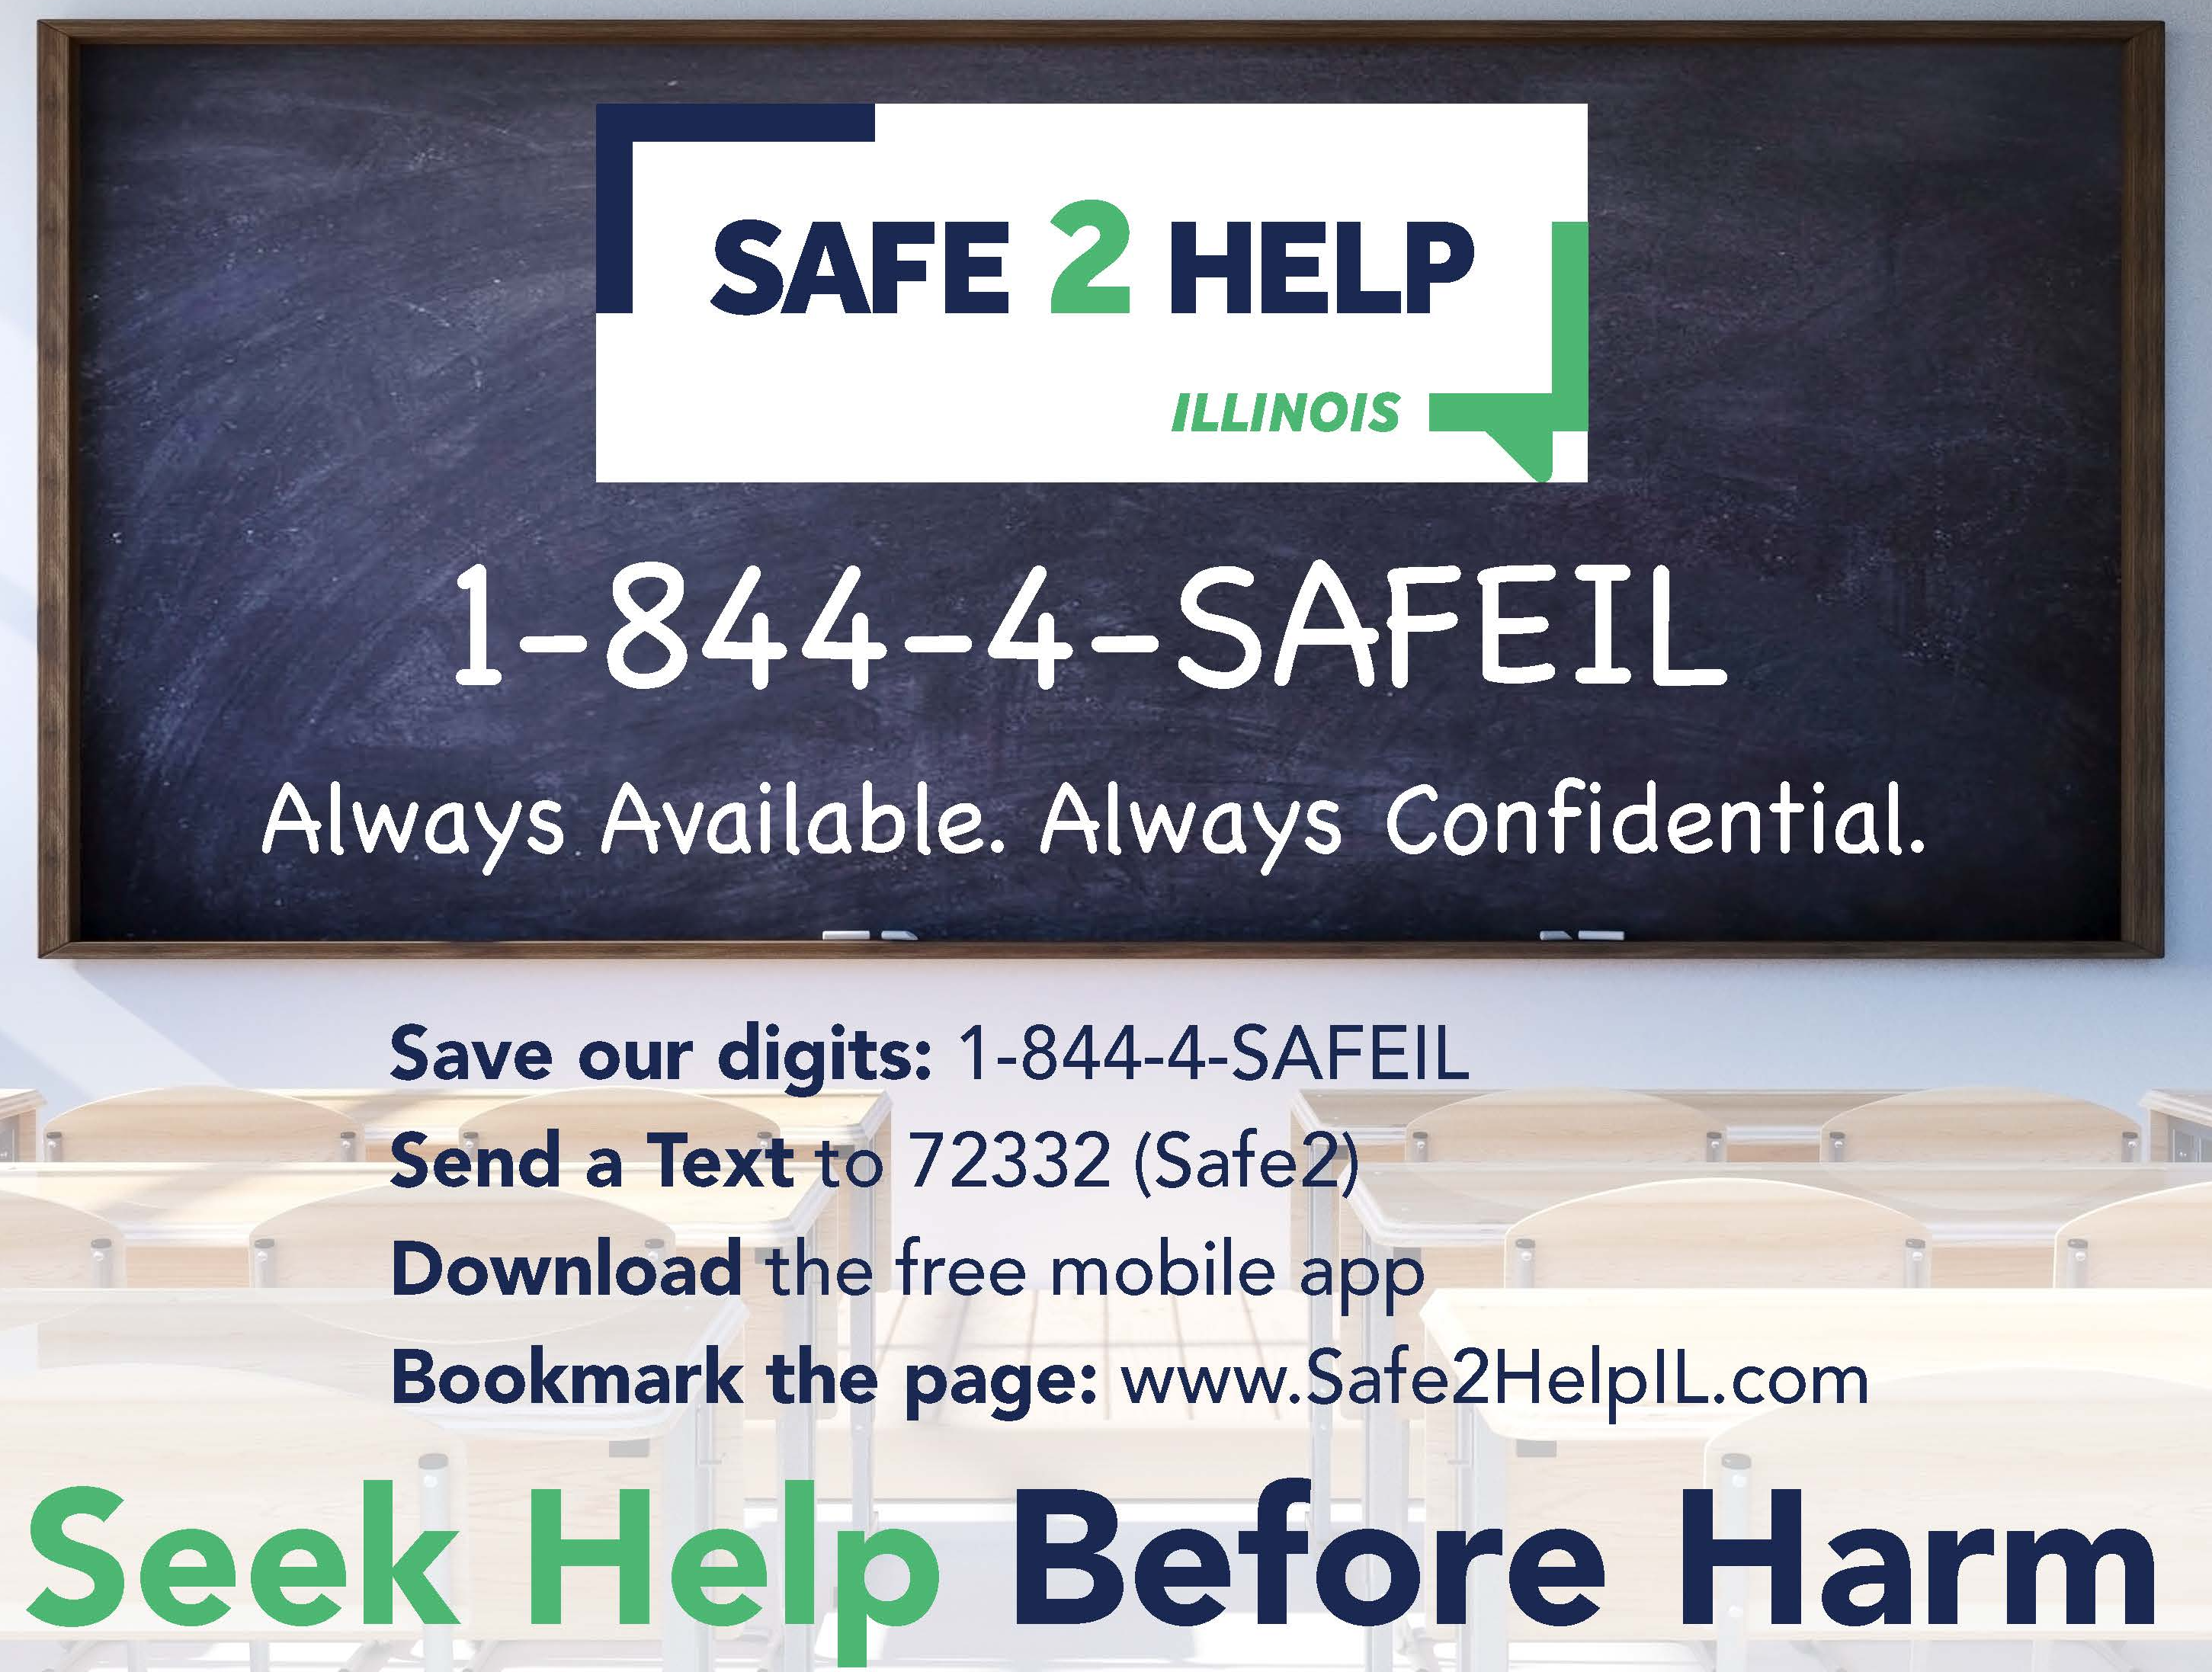 Safe 2 Help 1-844-4-SafeIL Always Available. Always Confidential. Save our digits: 1-844-4-SAFEIL. Send a text to 72332 (safe2) Download the free mobile app. Bookmark the page www.Safe2helpil.com. Seek help before harm. 